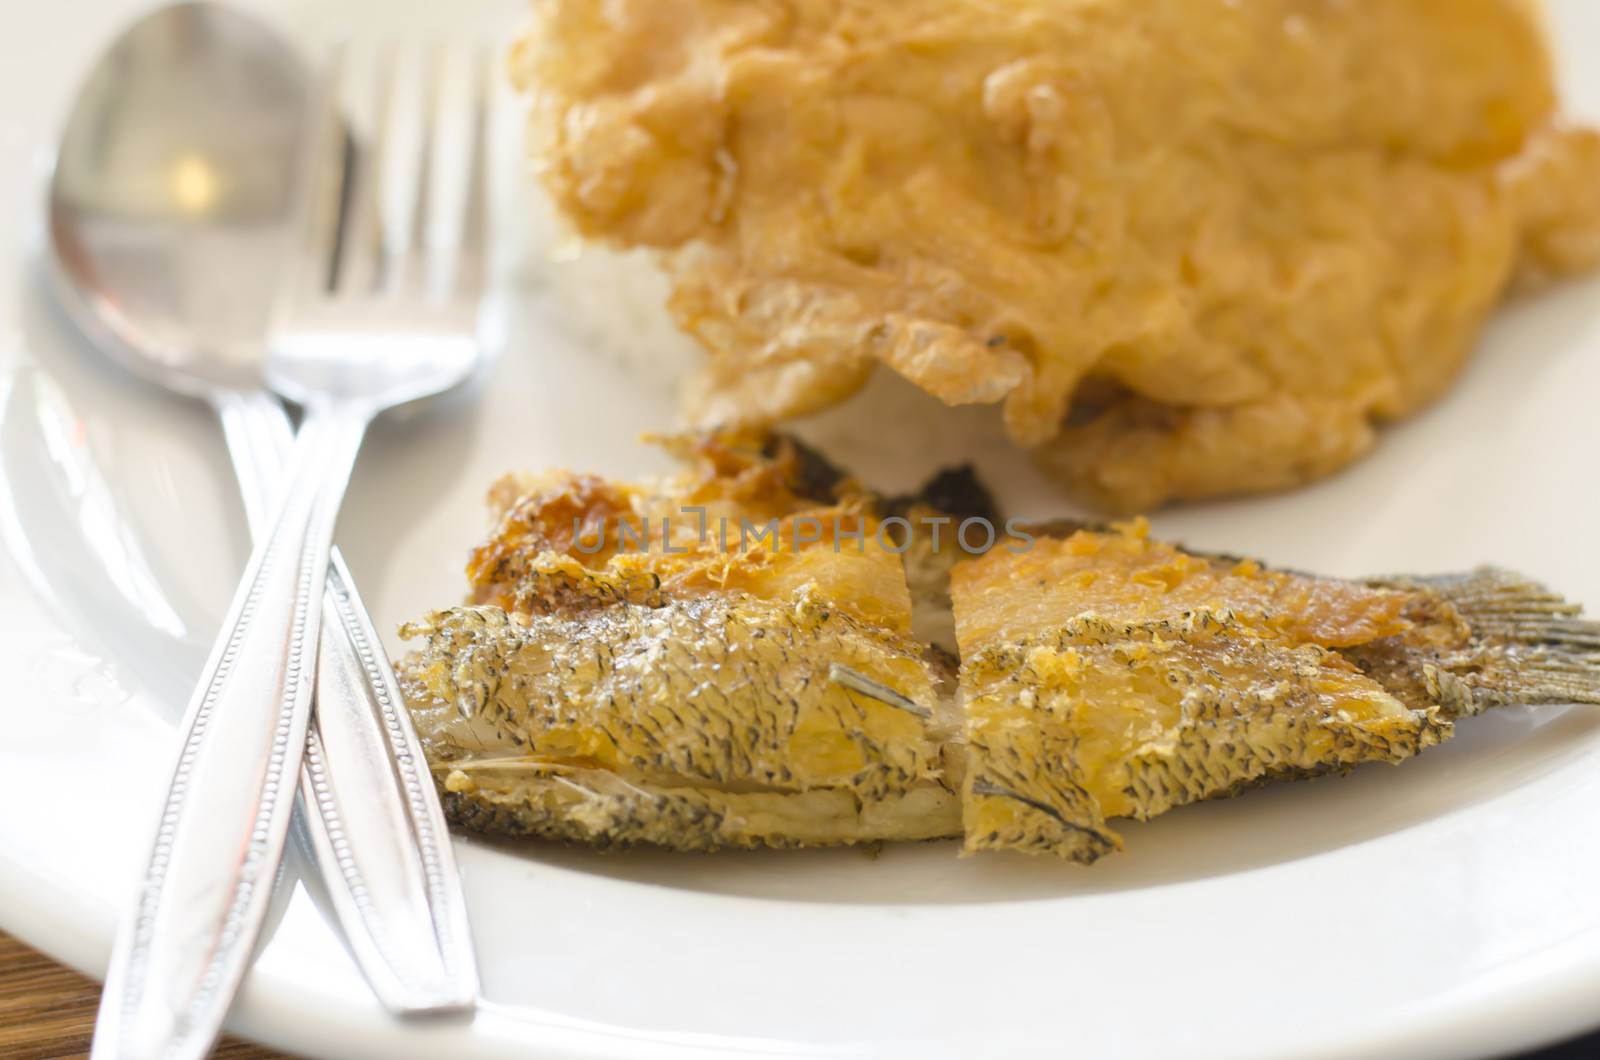 fried fish and omelet in dish by ammza12